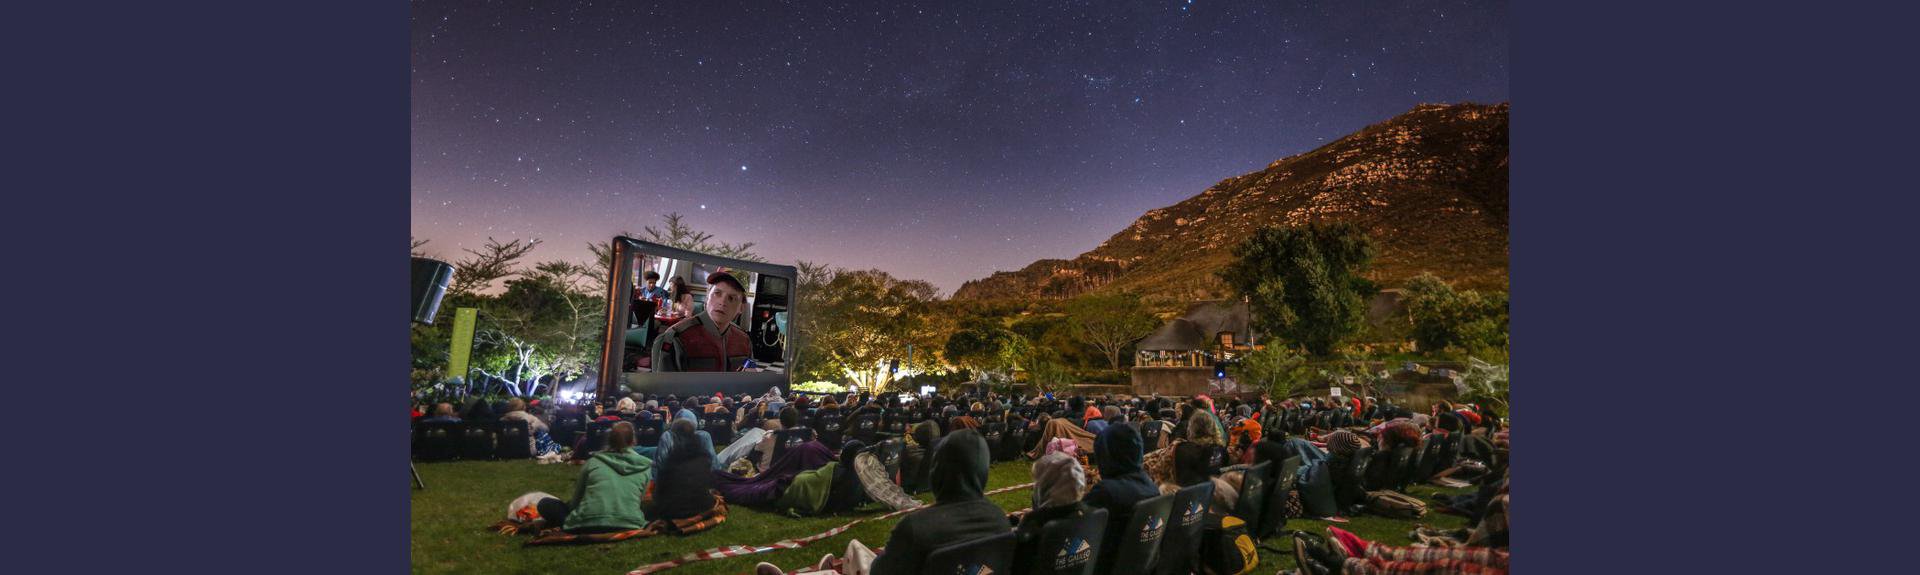 Outdoor movies: Back To The Future Part II